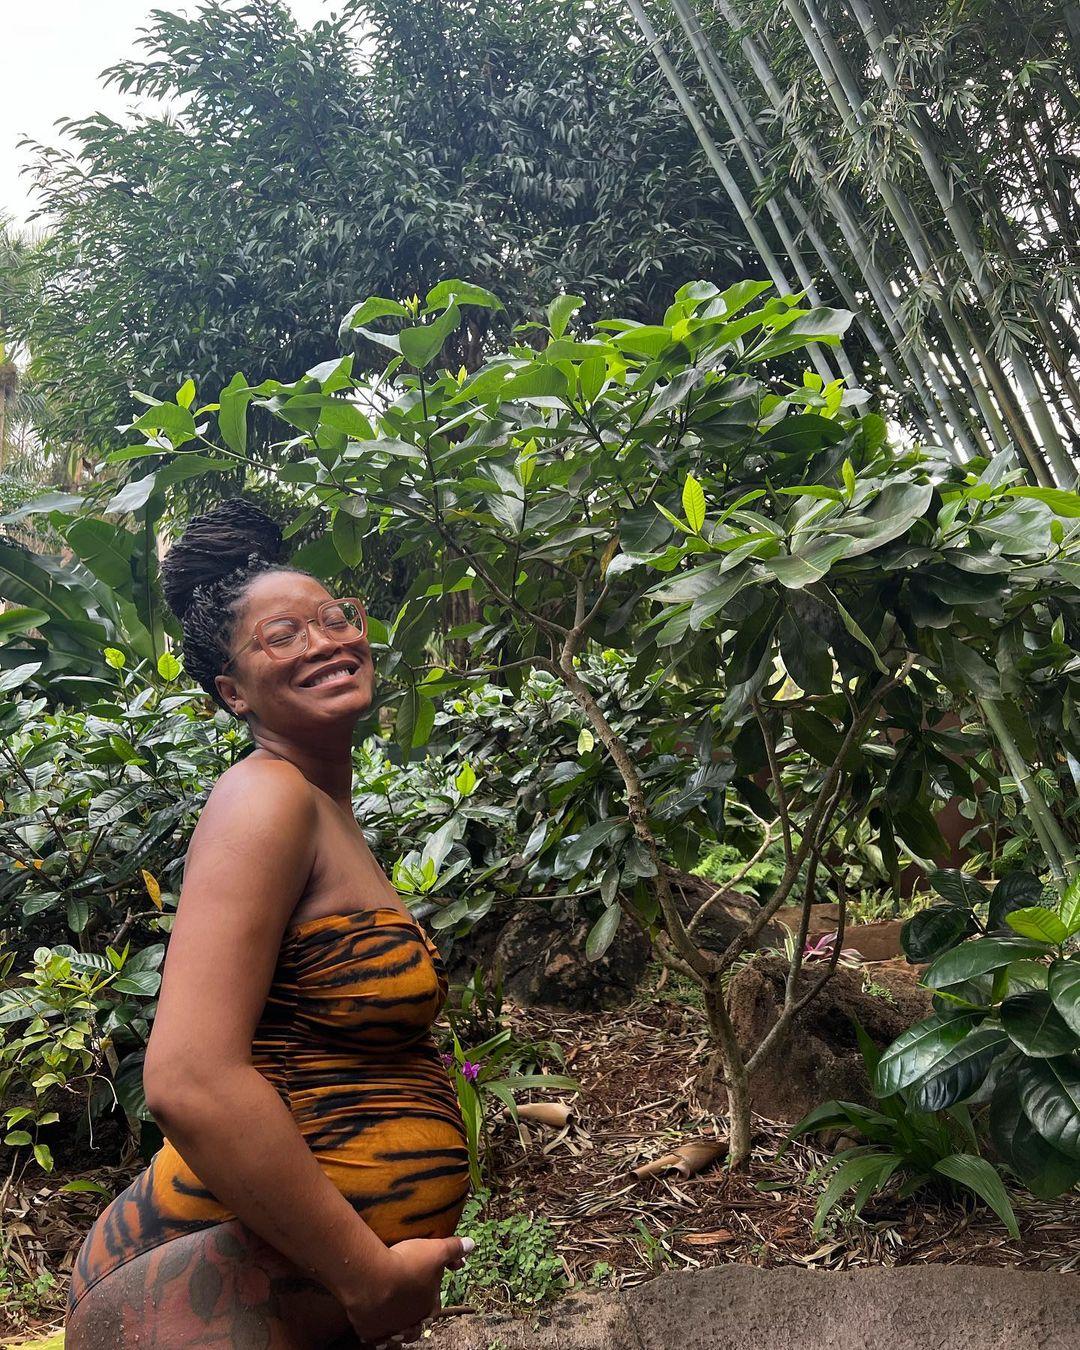 Keke Palmer Looks Radiant With Her Baby Bump In Beautiful Vacation Photos: 'The Theme Is Rest'